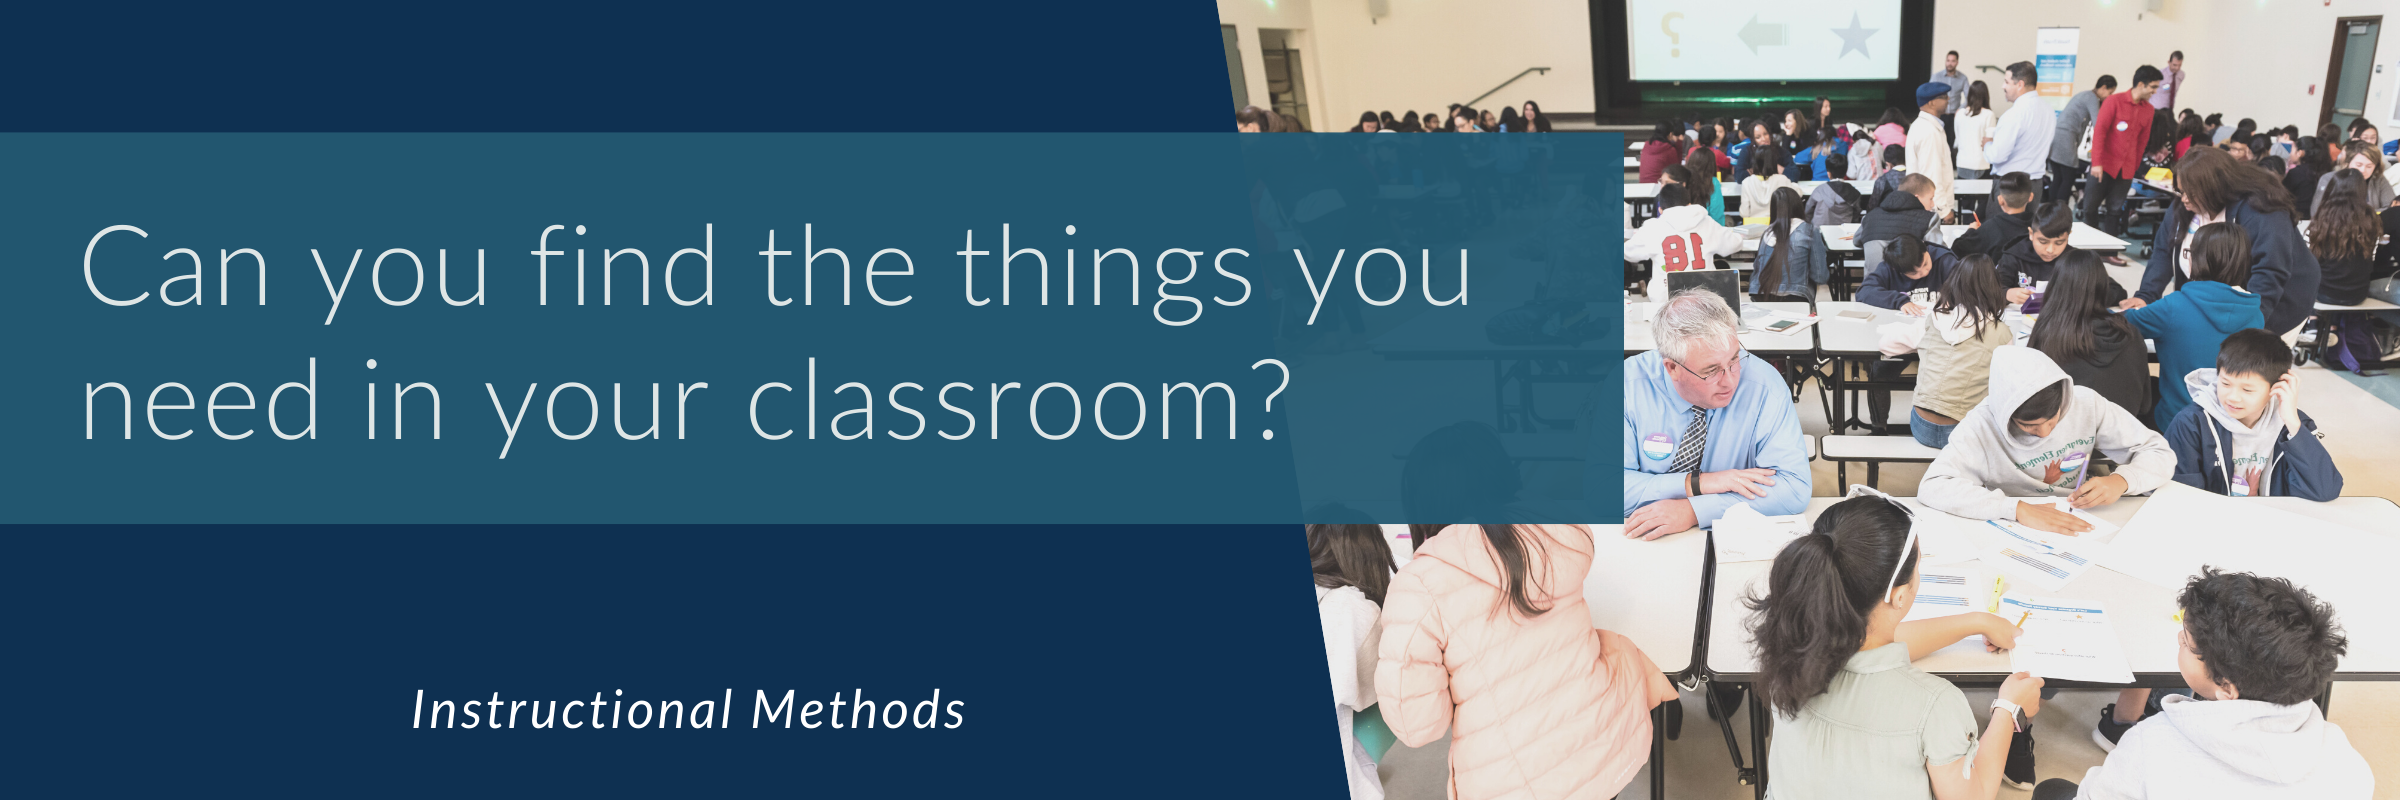 Can you find the things you need in your classroom?